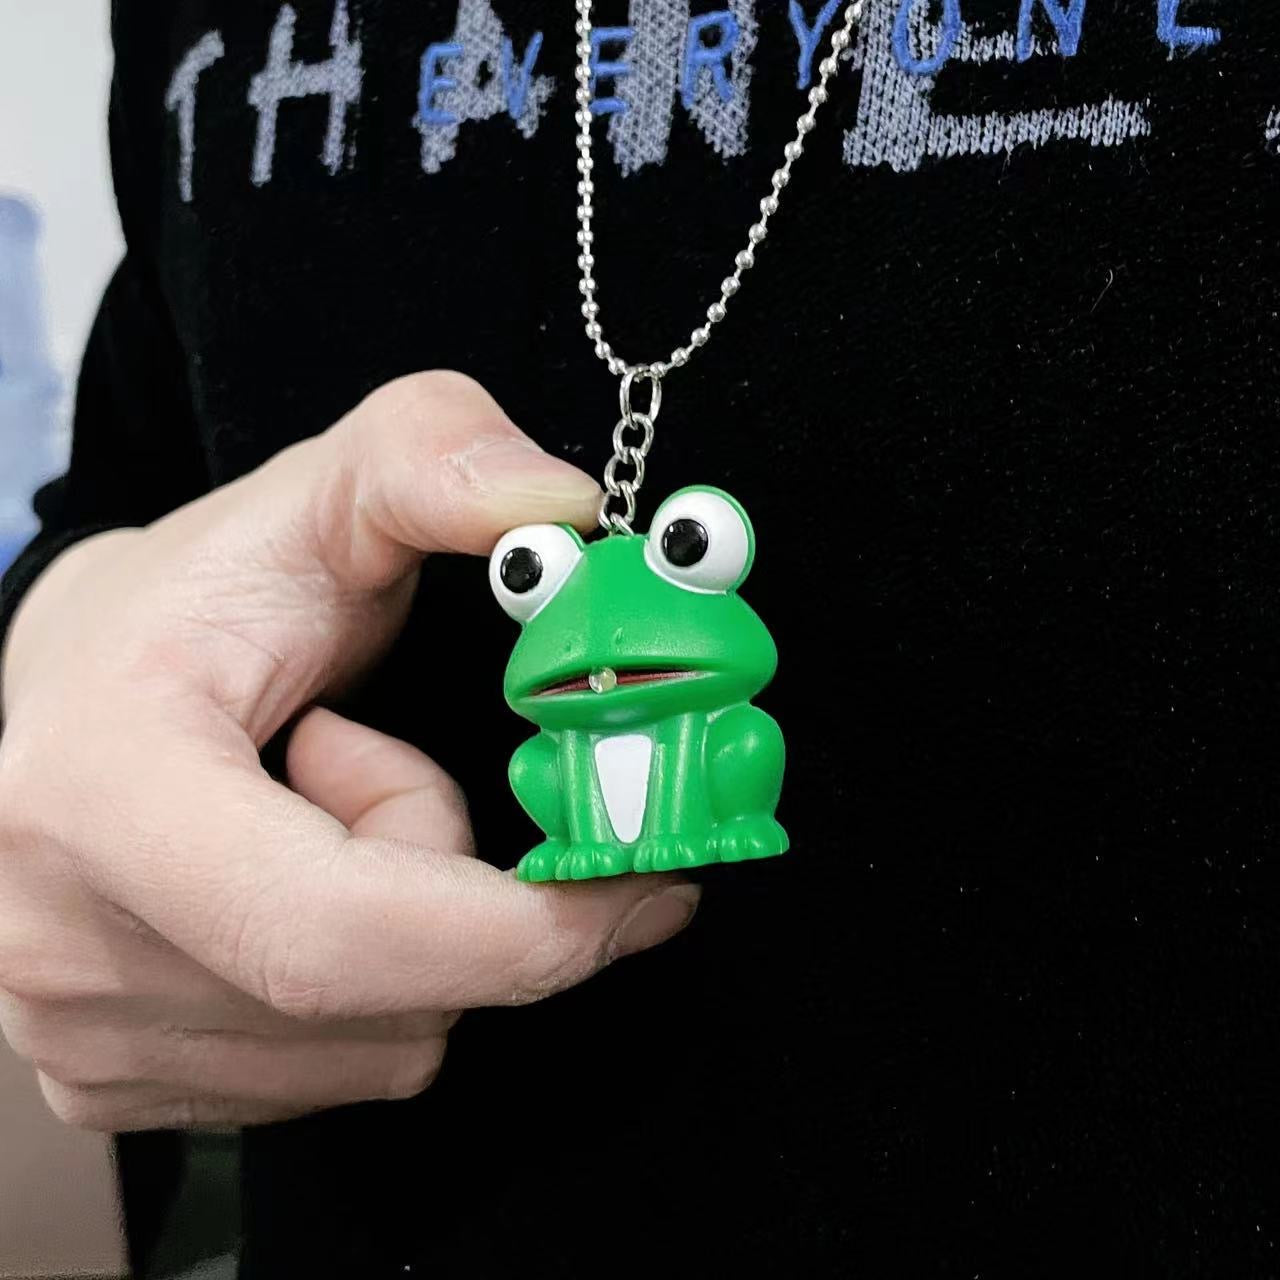 【Special Offer!】LED Light and Sound Cow Frog Donkey Keychain Pendant